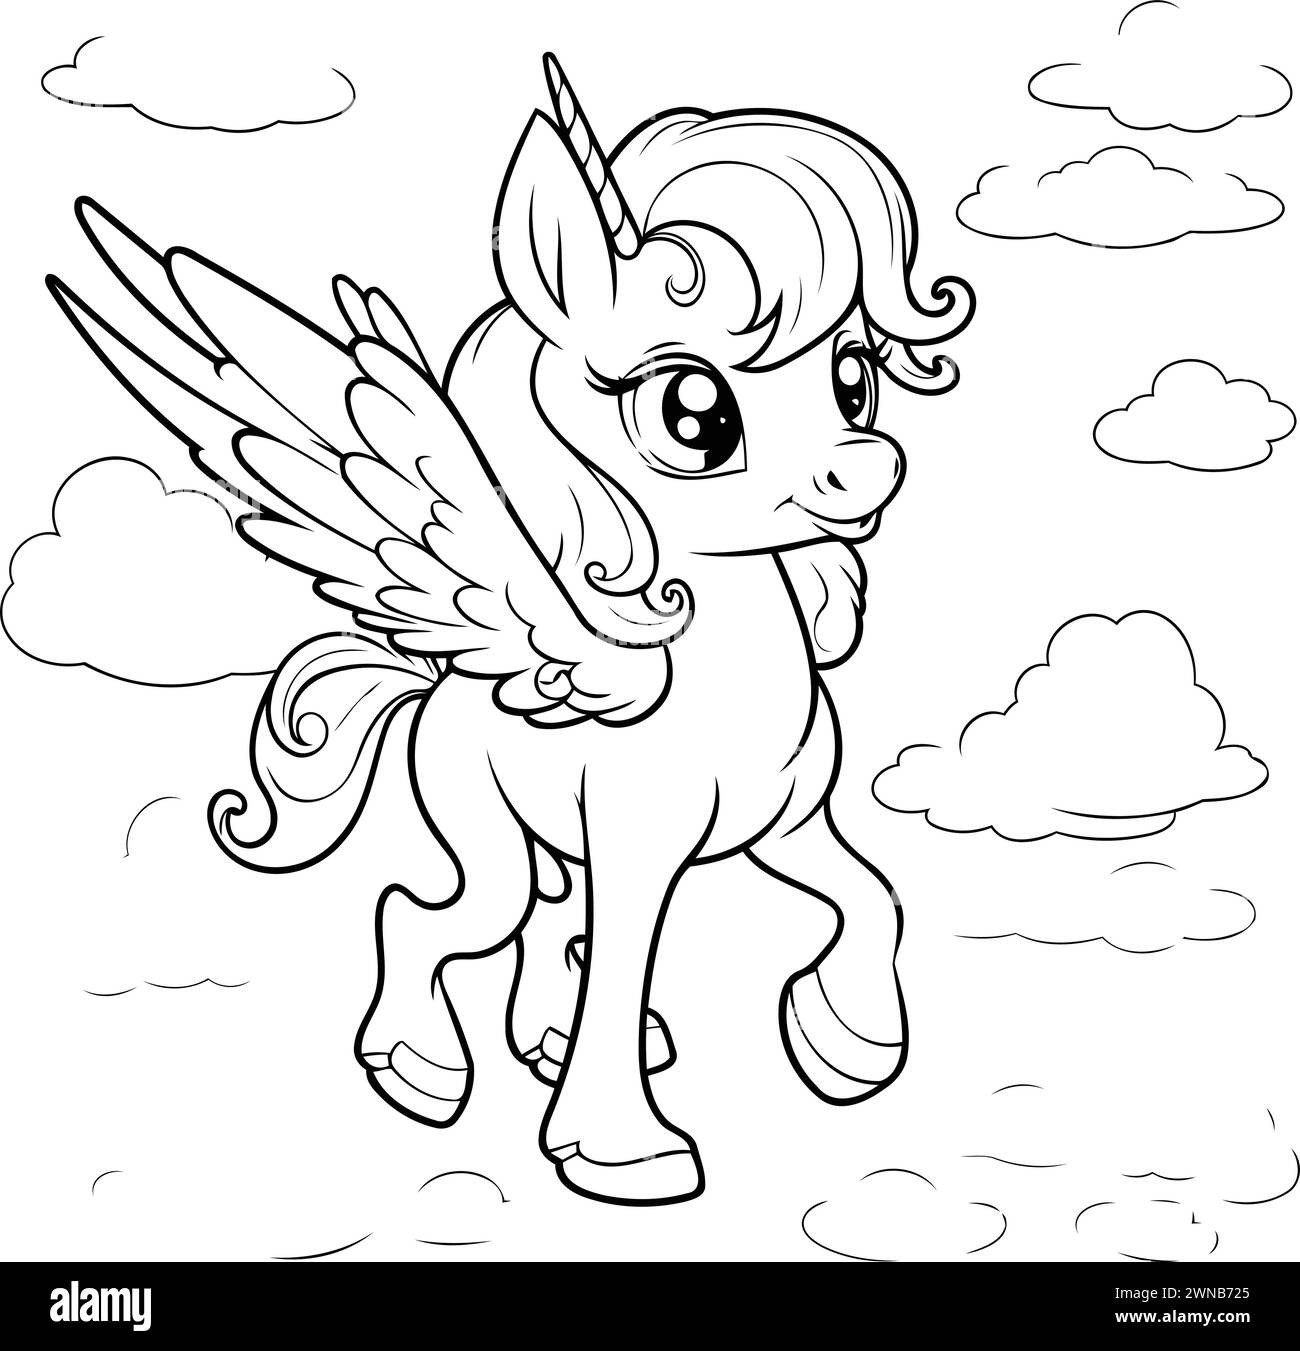 Black and White Cartoon Illustration of Unicorn Fantasy Animal for Coloring Book Stock Vector